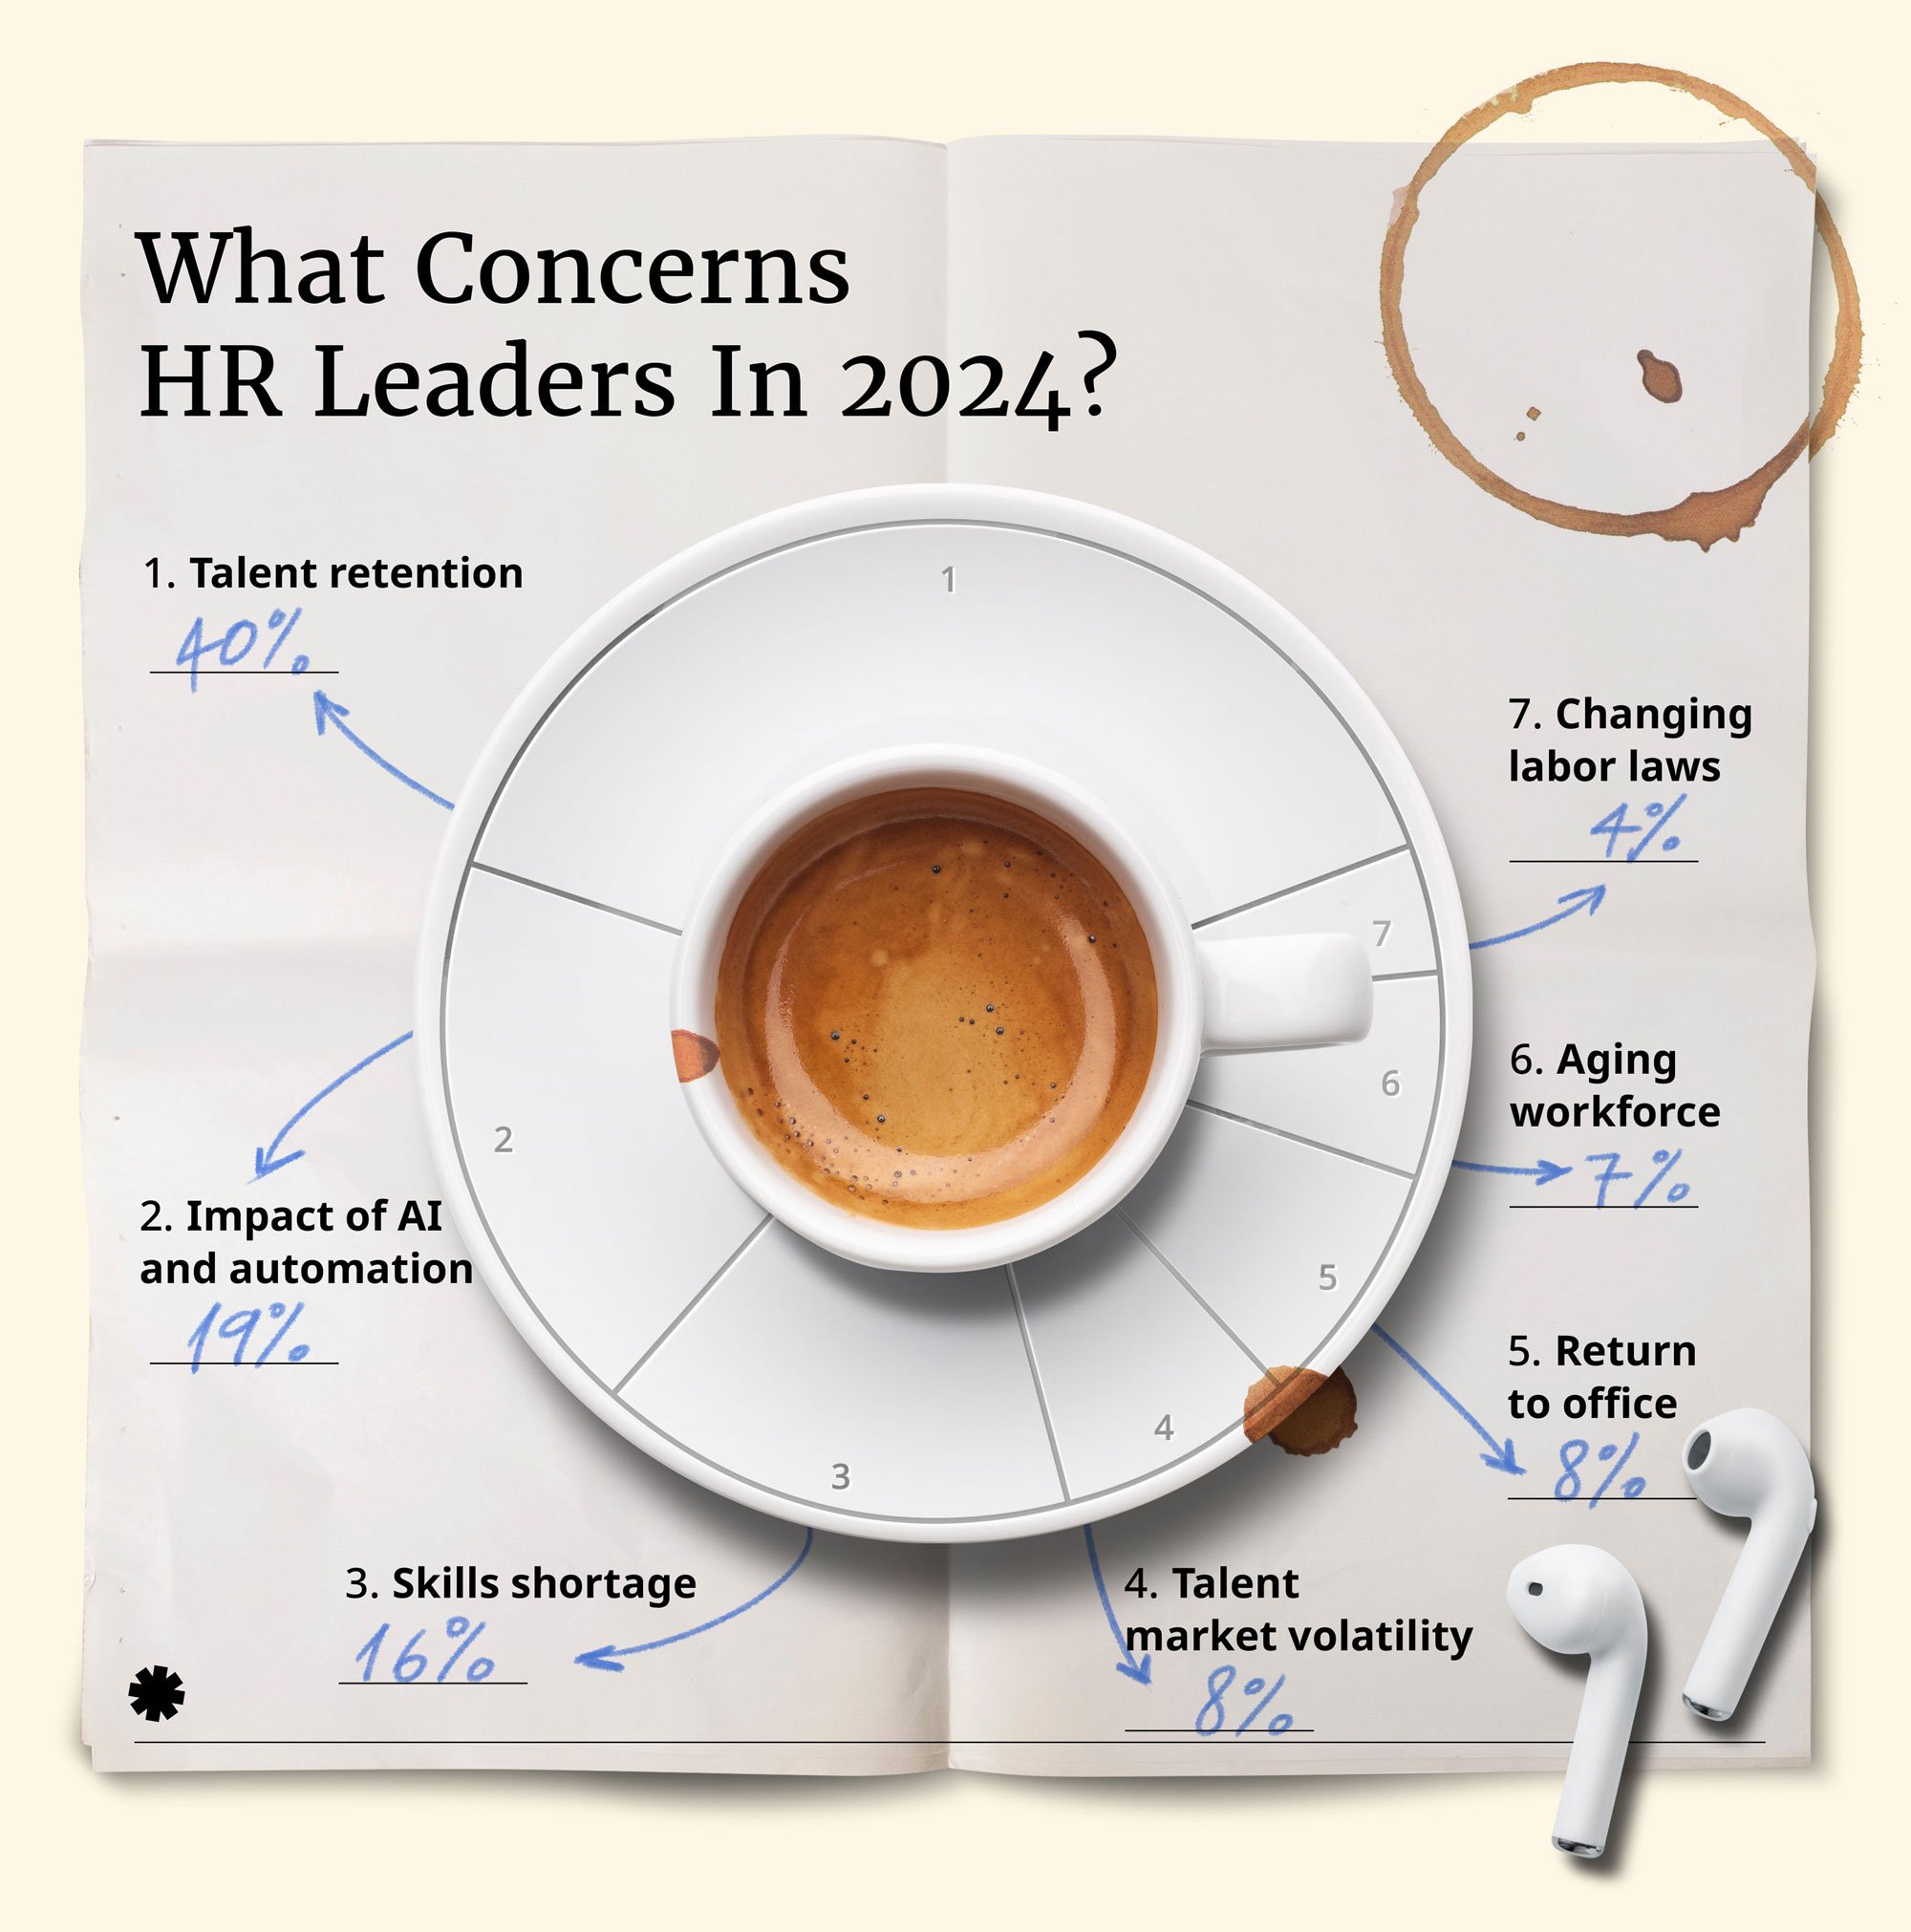 What Concerns HR Leaders in 2024? Talent retention, impact of AI and automation, skills shortage, talent market volatility, return to office, aging workforce, and changing labor laws.